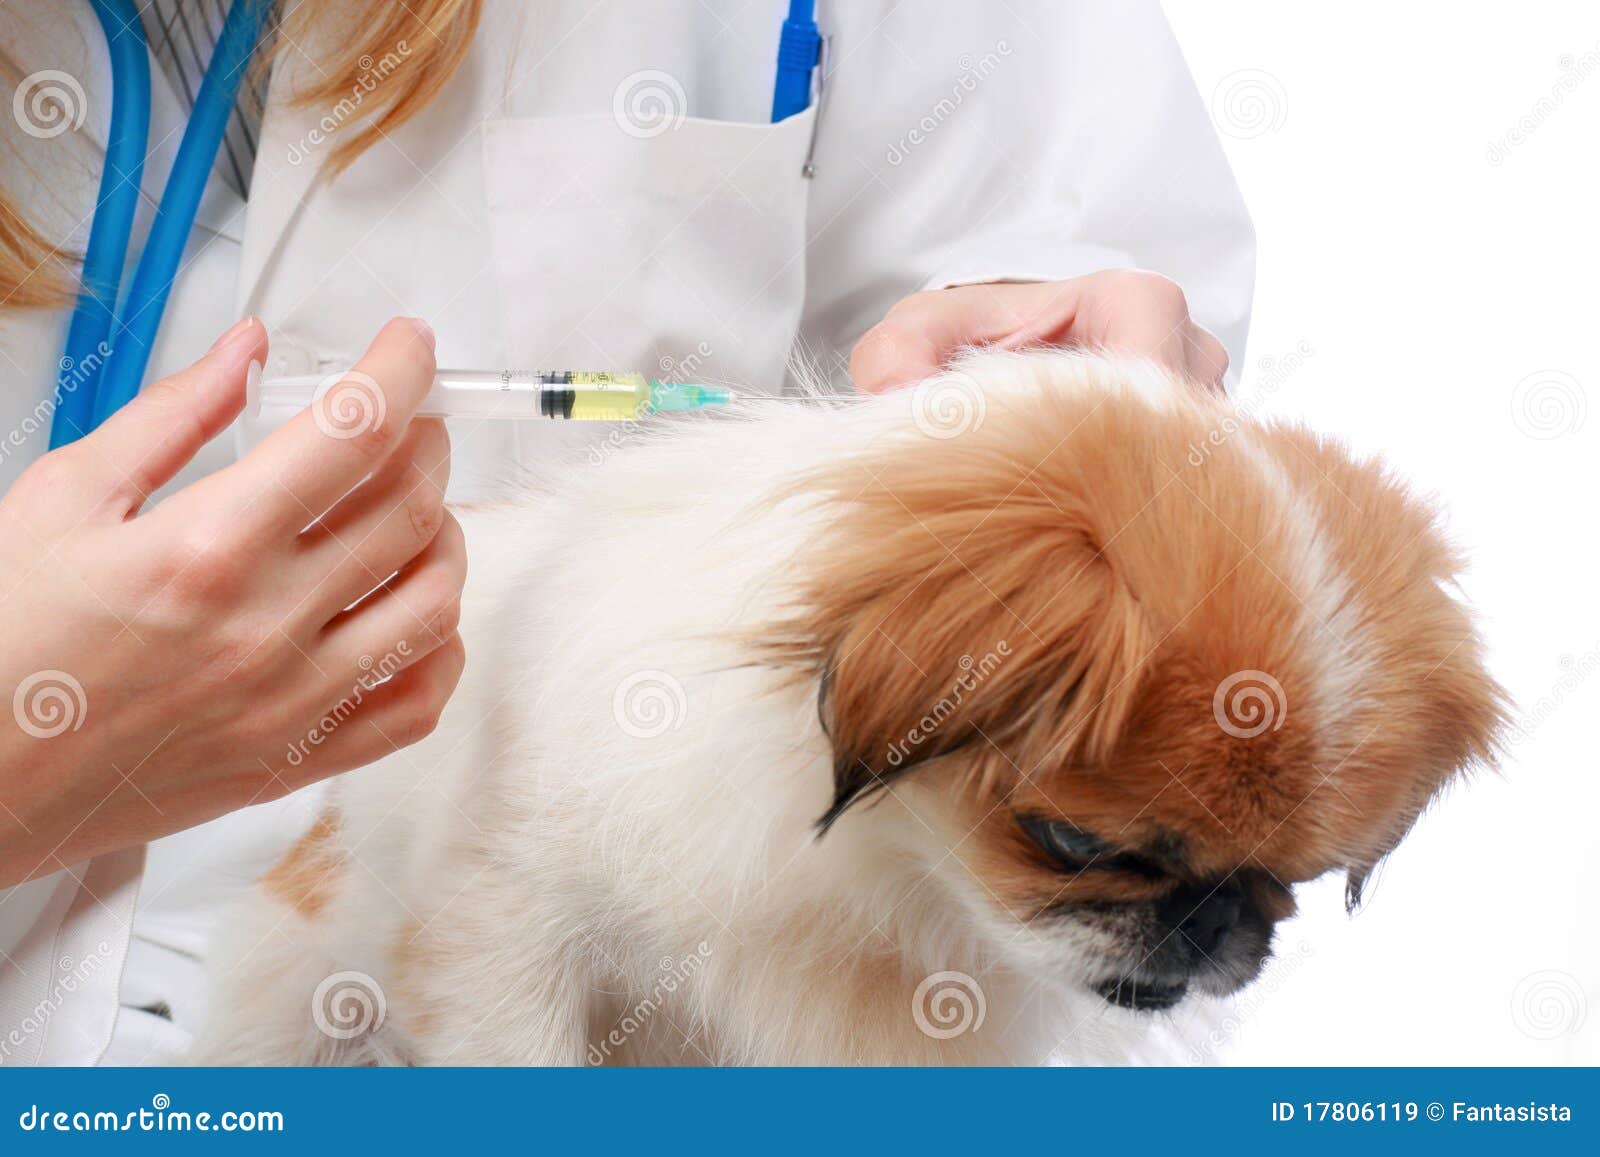 Dog Healthcare Vaccination. Stock Image Image of